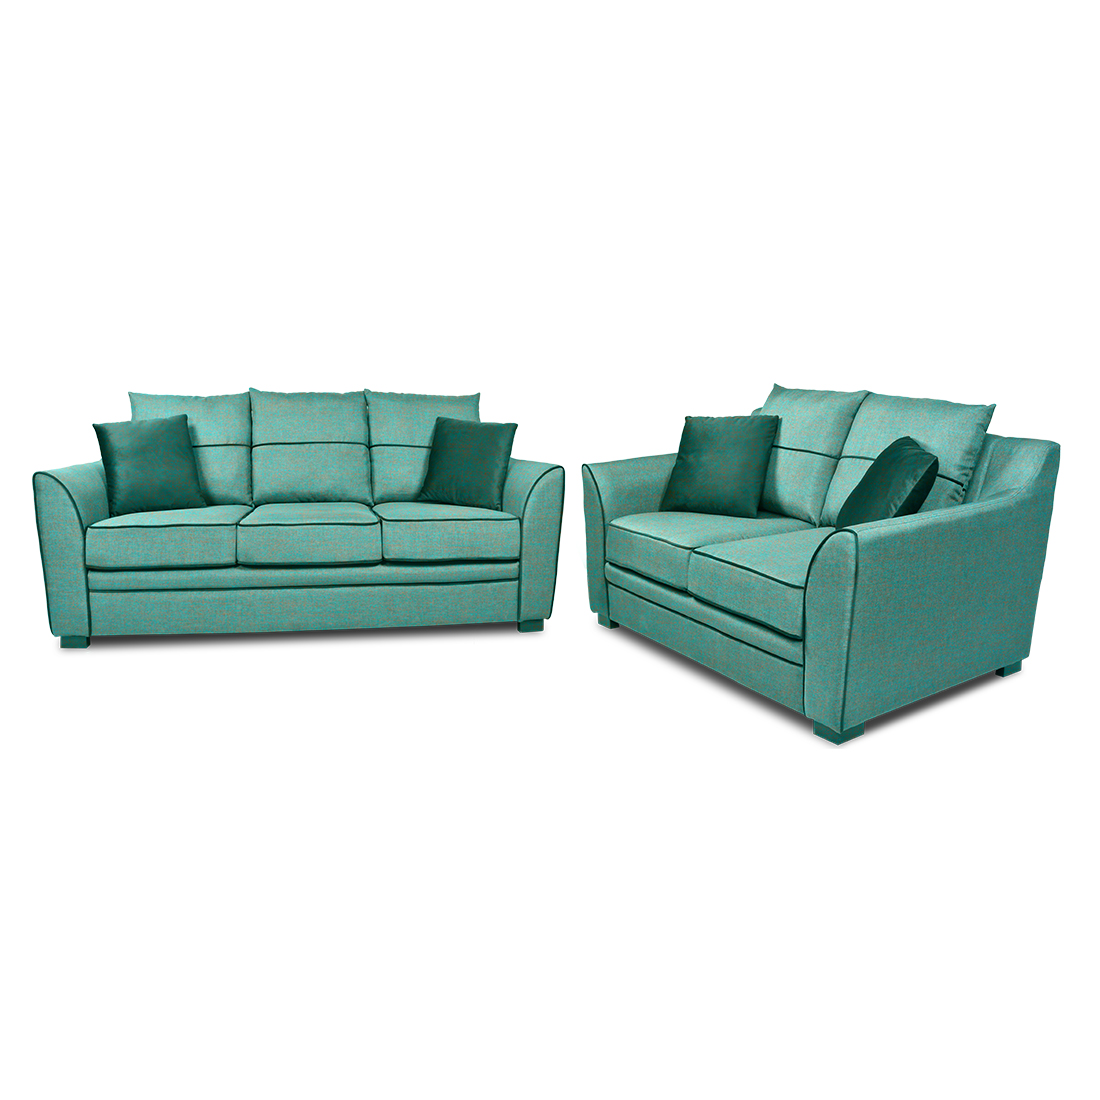 Victoria 3+2 Seater (Turquoise Green)